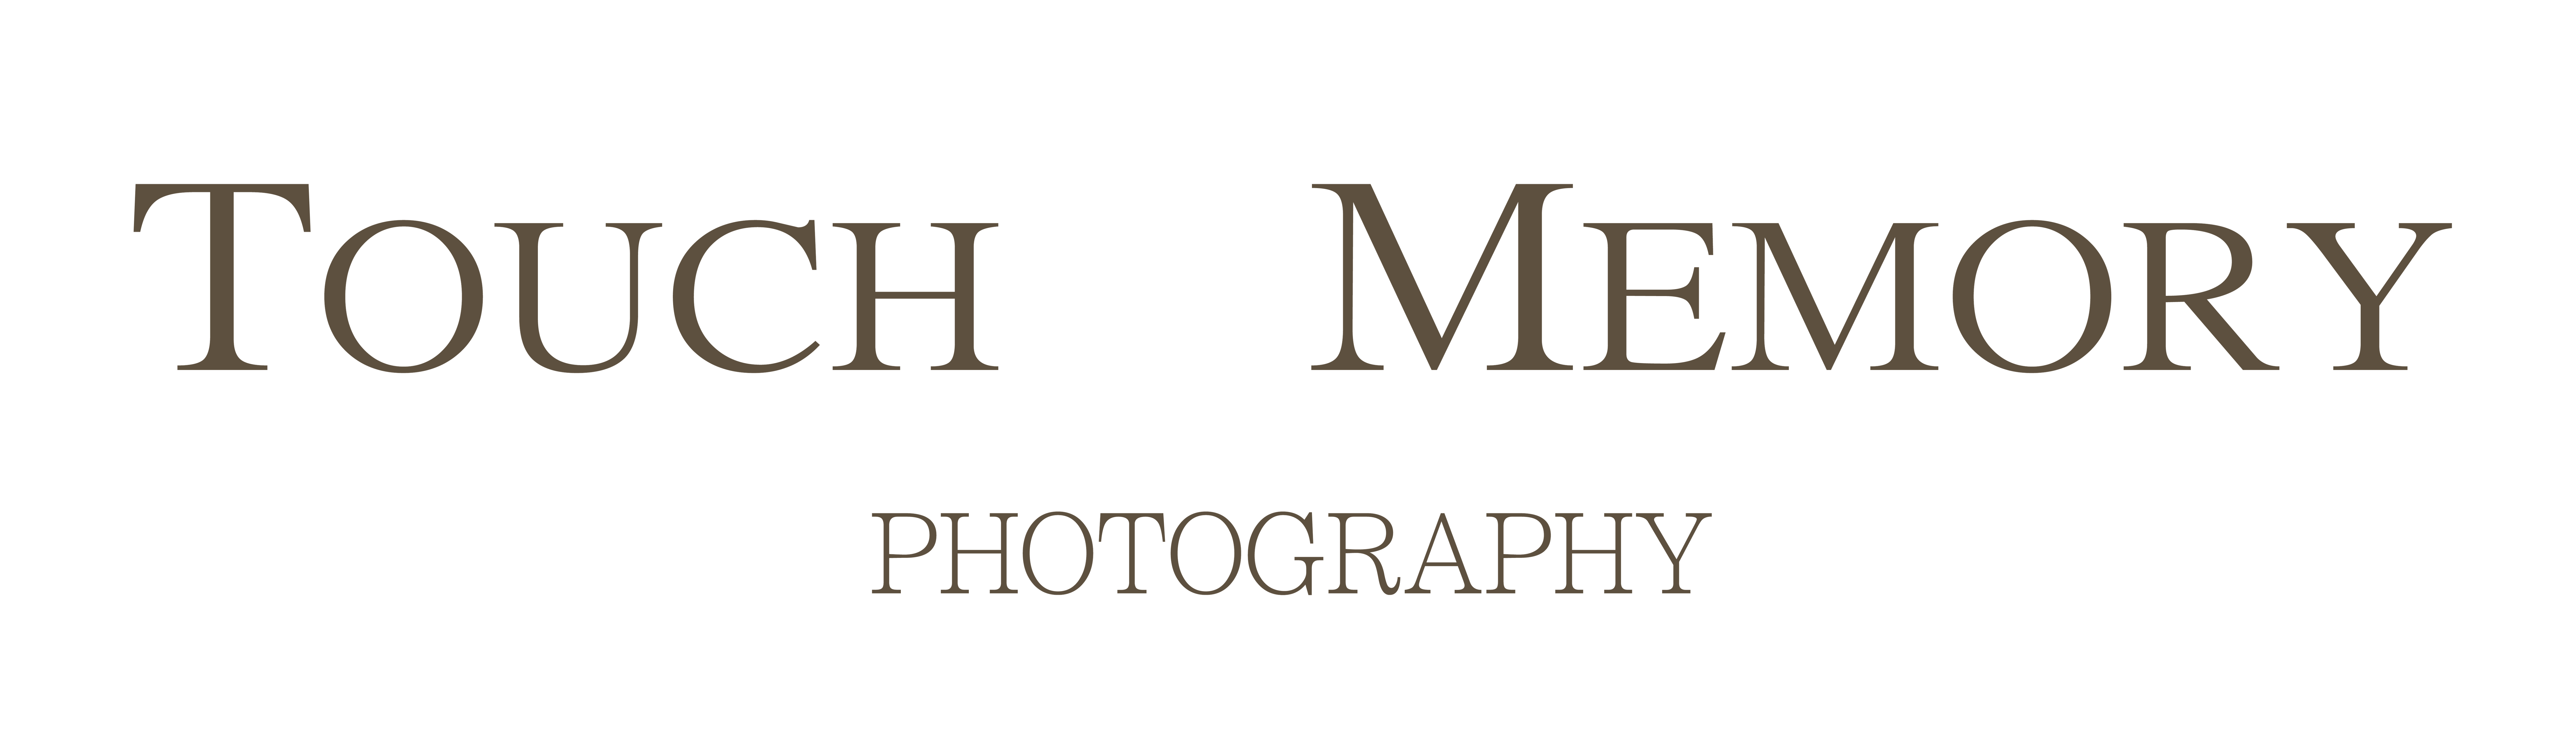 Touch Memory Photography